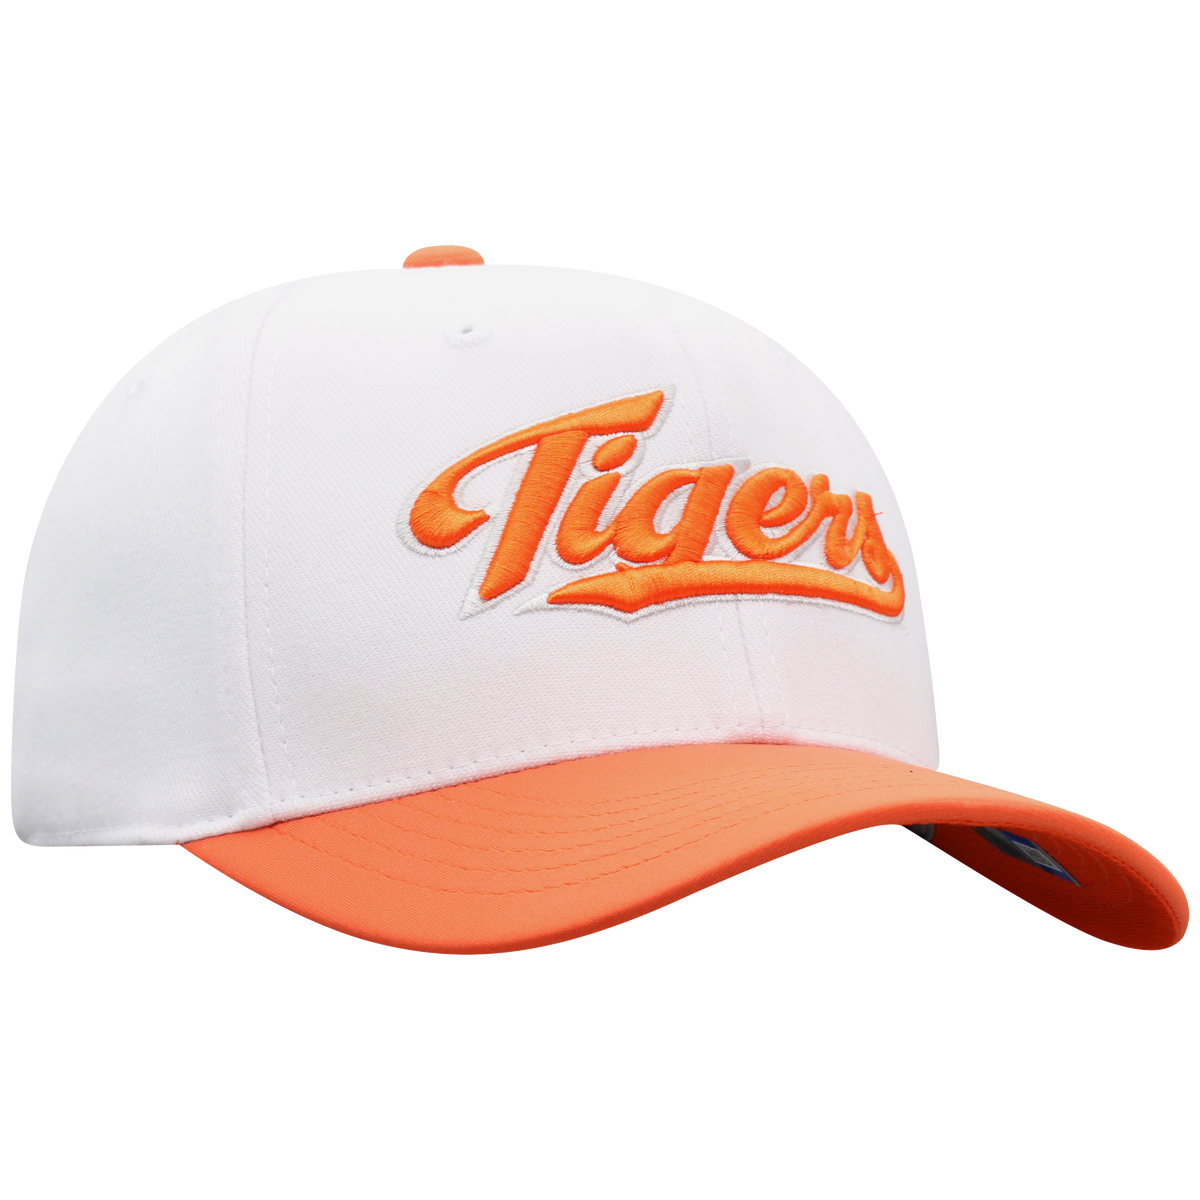 Top of the World Clemson Infield Cap With Tigers Script - 2 Tone